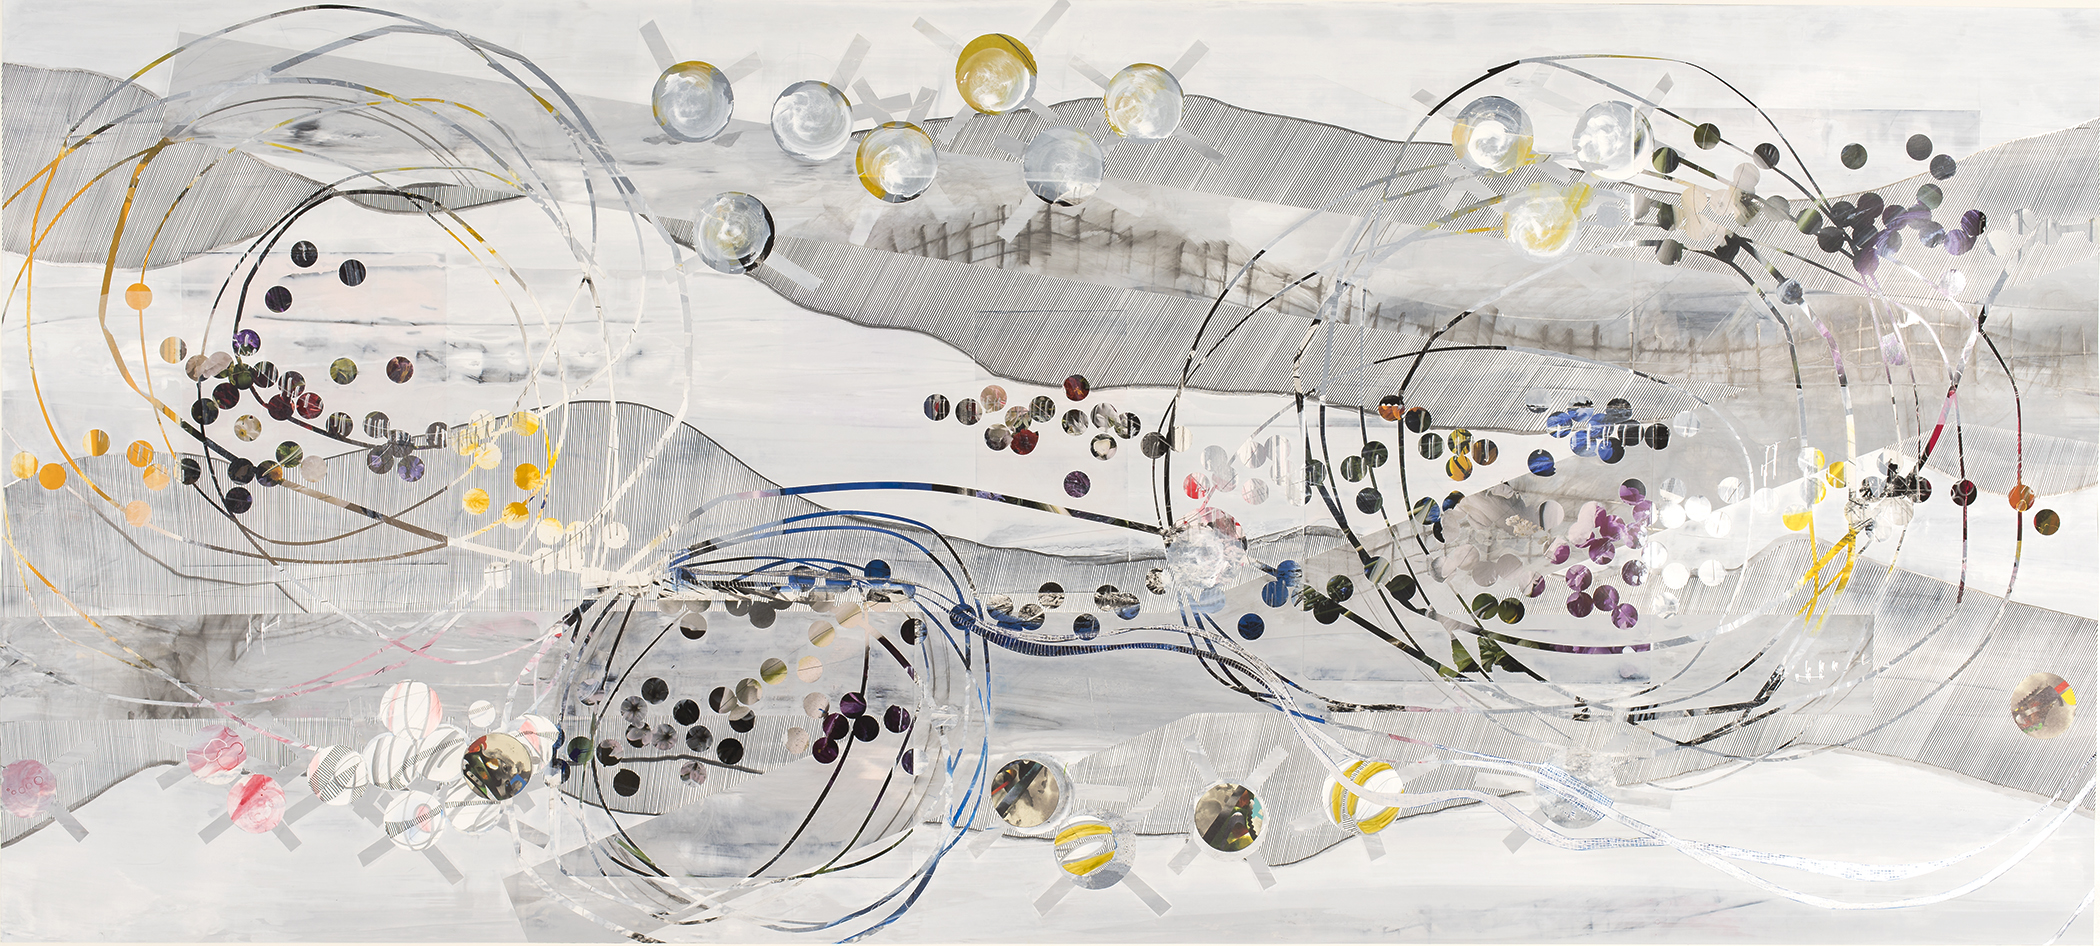 BLAZE 213 - 2015, acrylic, found paper, watercolor, graphite, ink on paper, 30.75 X 68.25 inches (AVAILABLE)